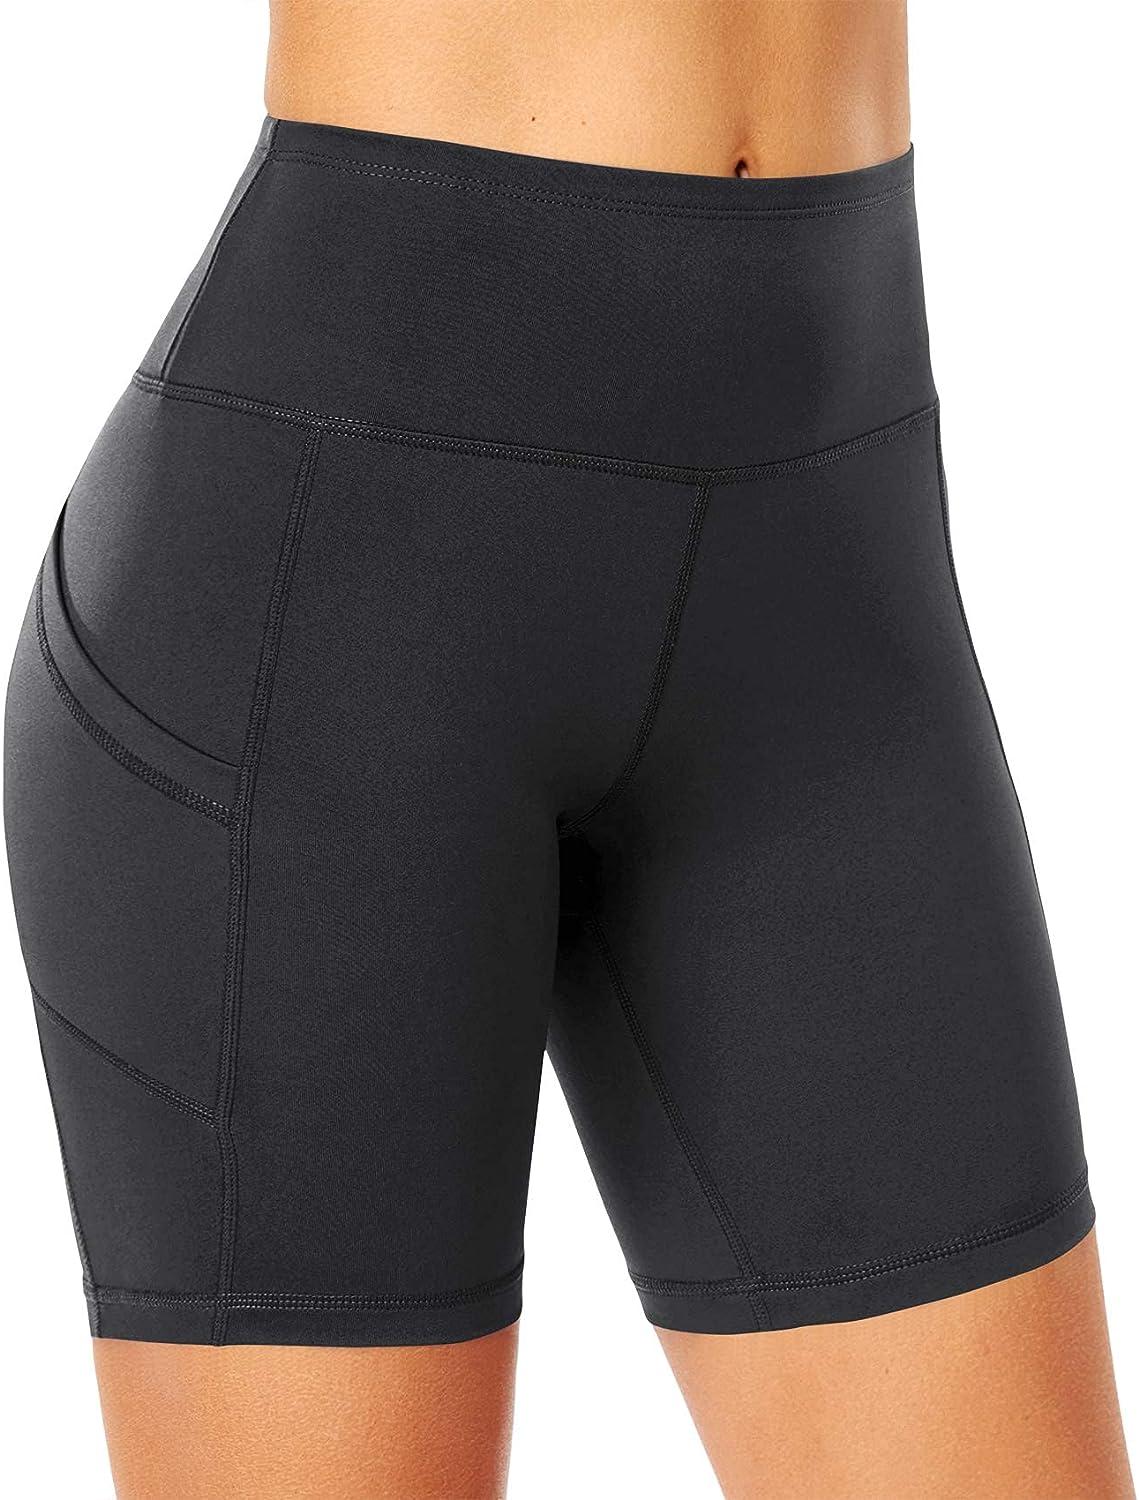 kenlcad Women's High Waist Leggings 4 5 8 Compression Shorts Running  Yoga Workout Pants 8-3 Pack:black/Navy Blue /Blue Small